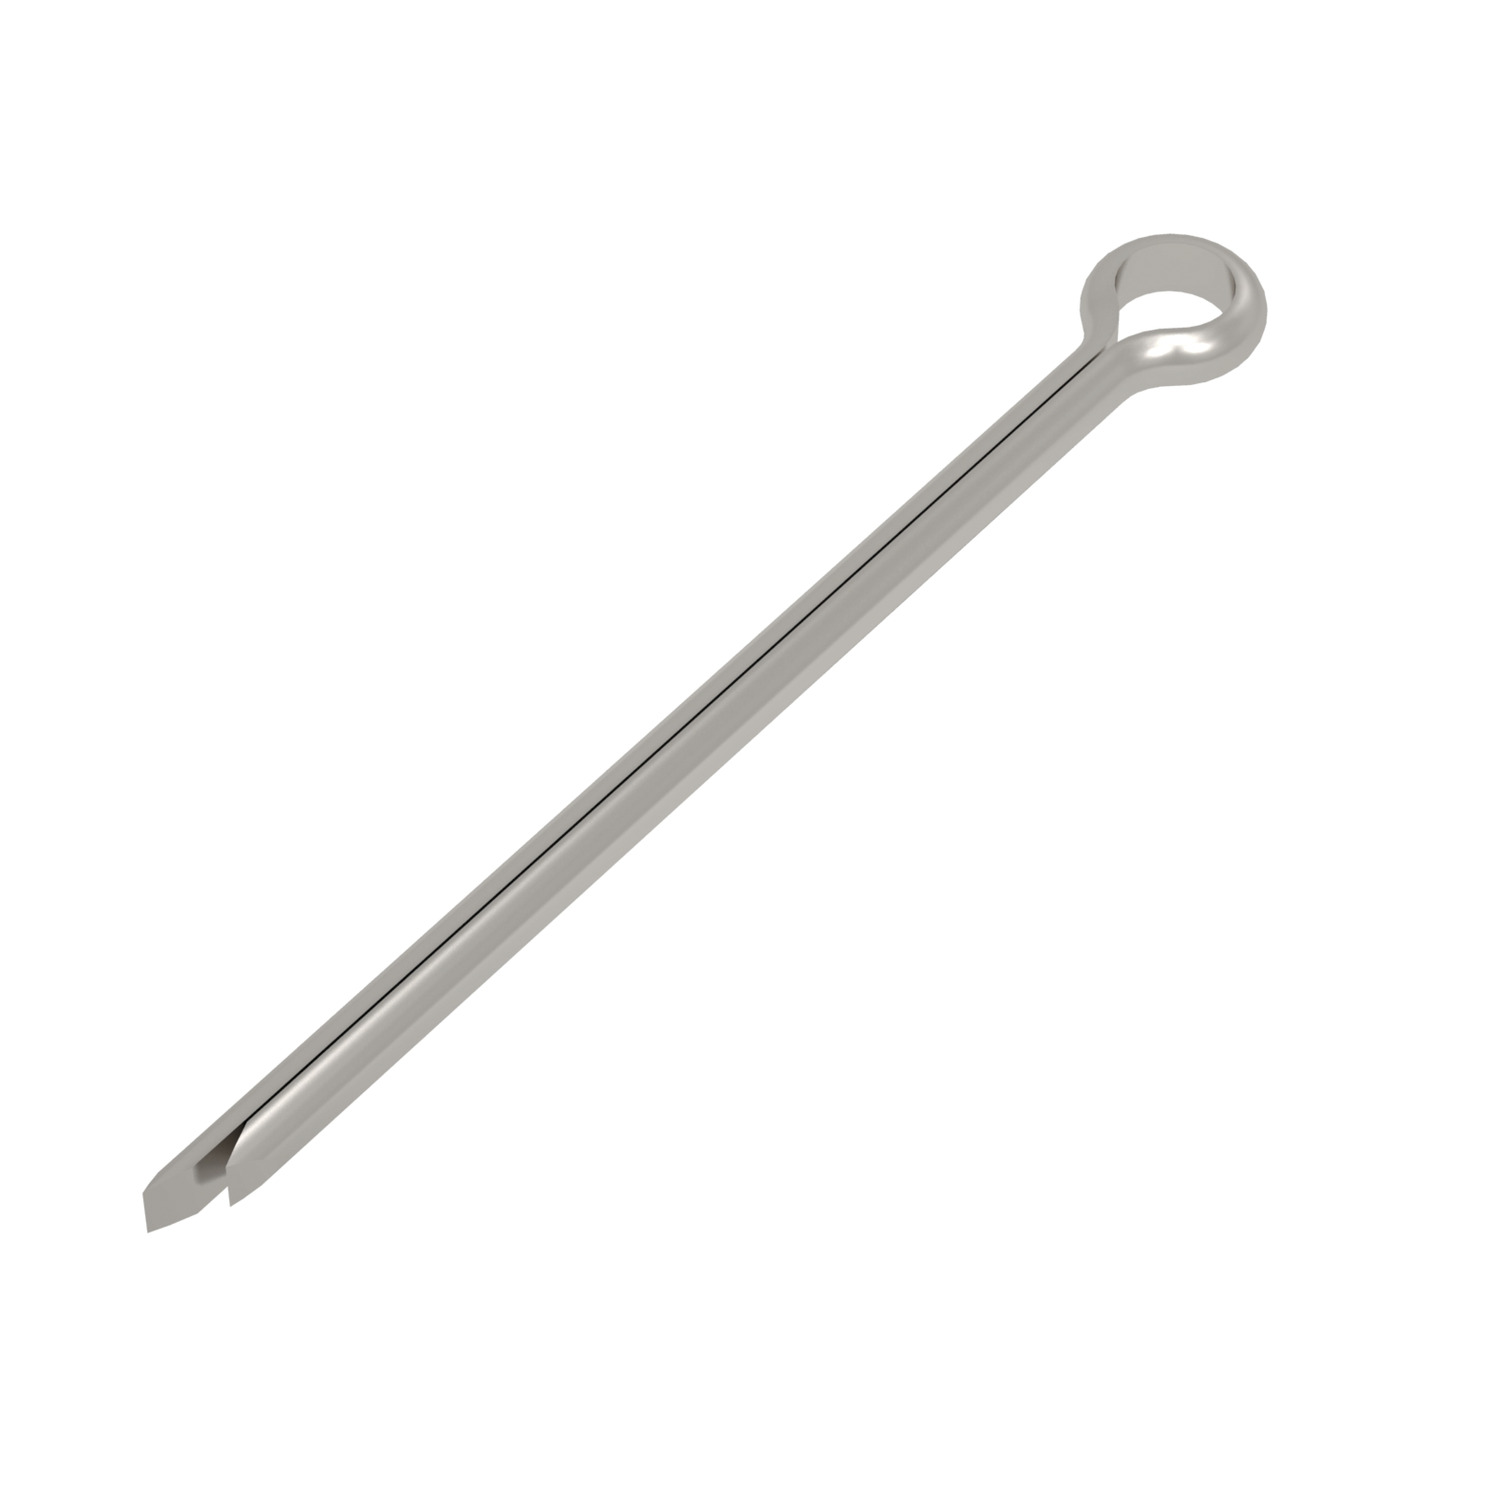 P1241 Stainless Cotter Pins